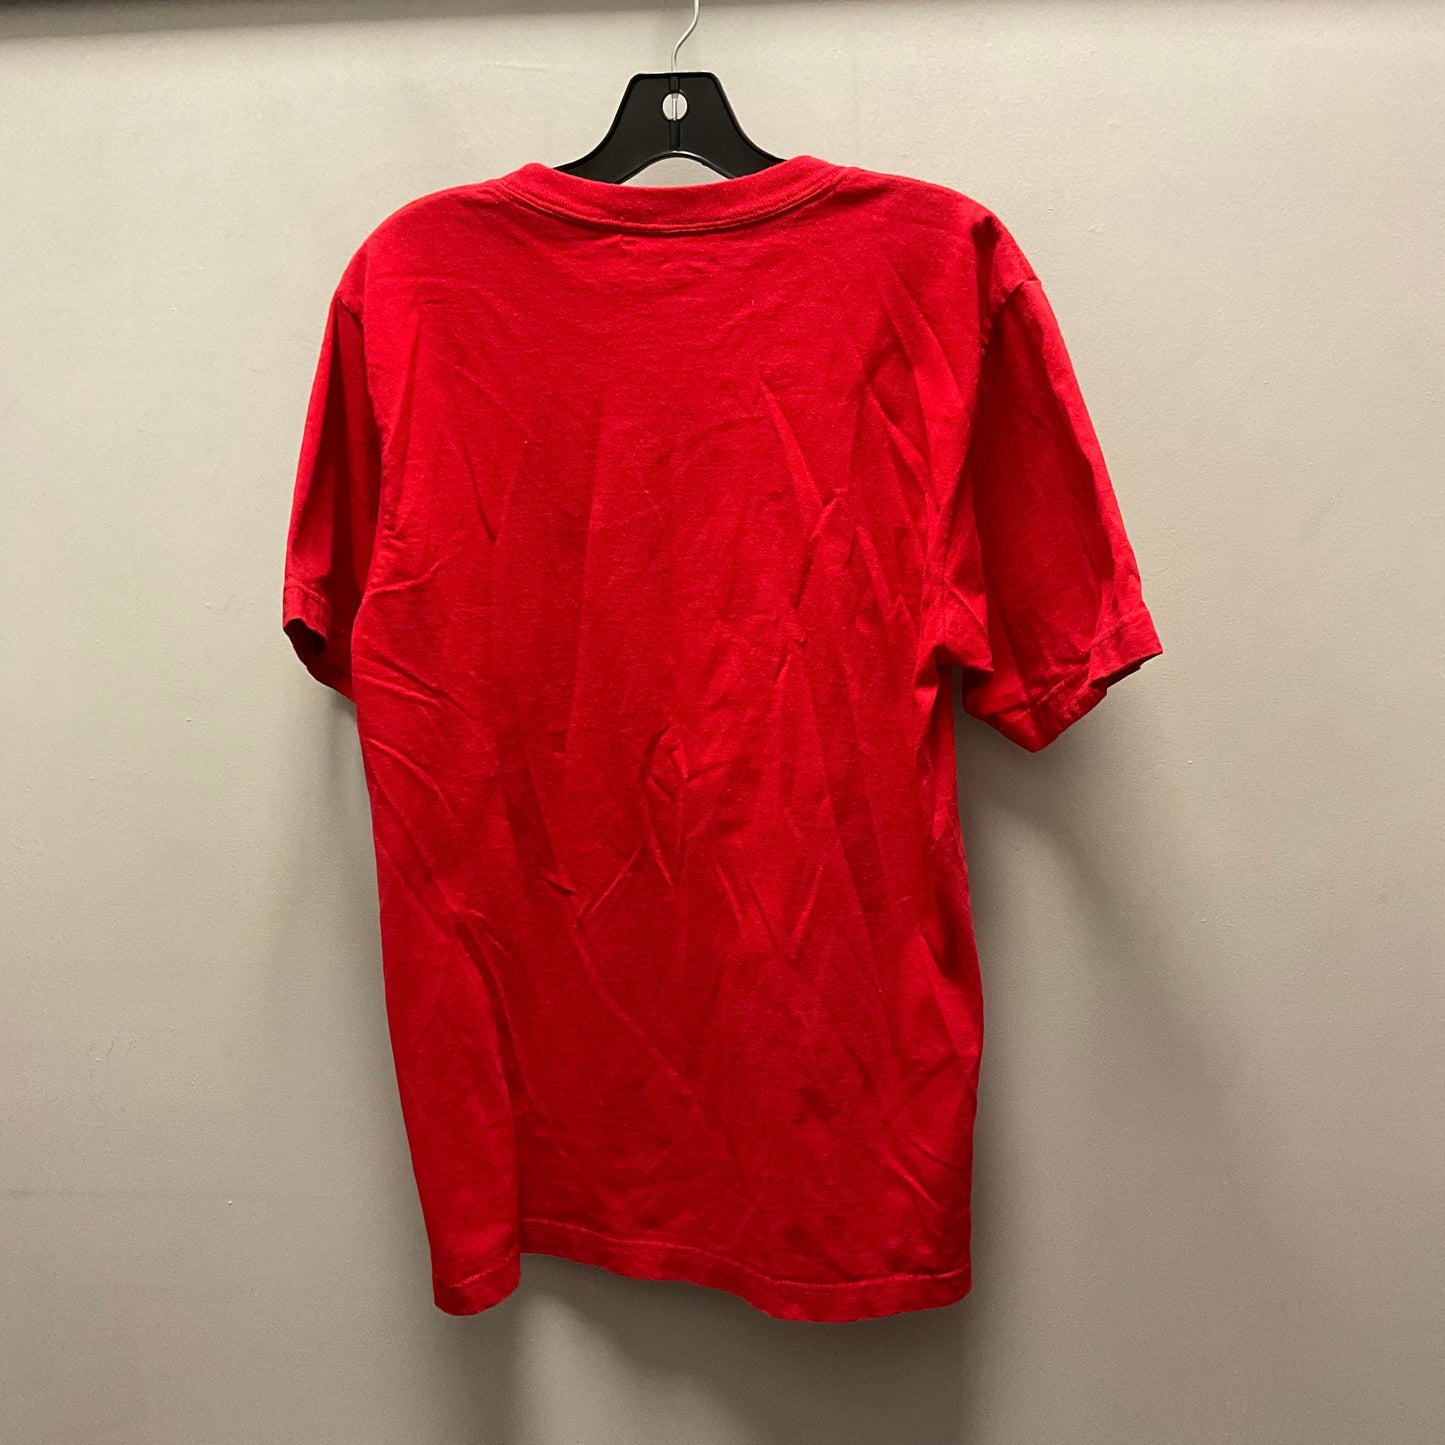 Red Top Short Sleeve Reebok, Size M